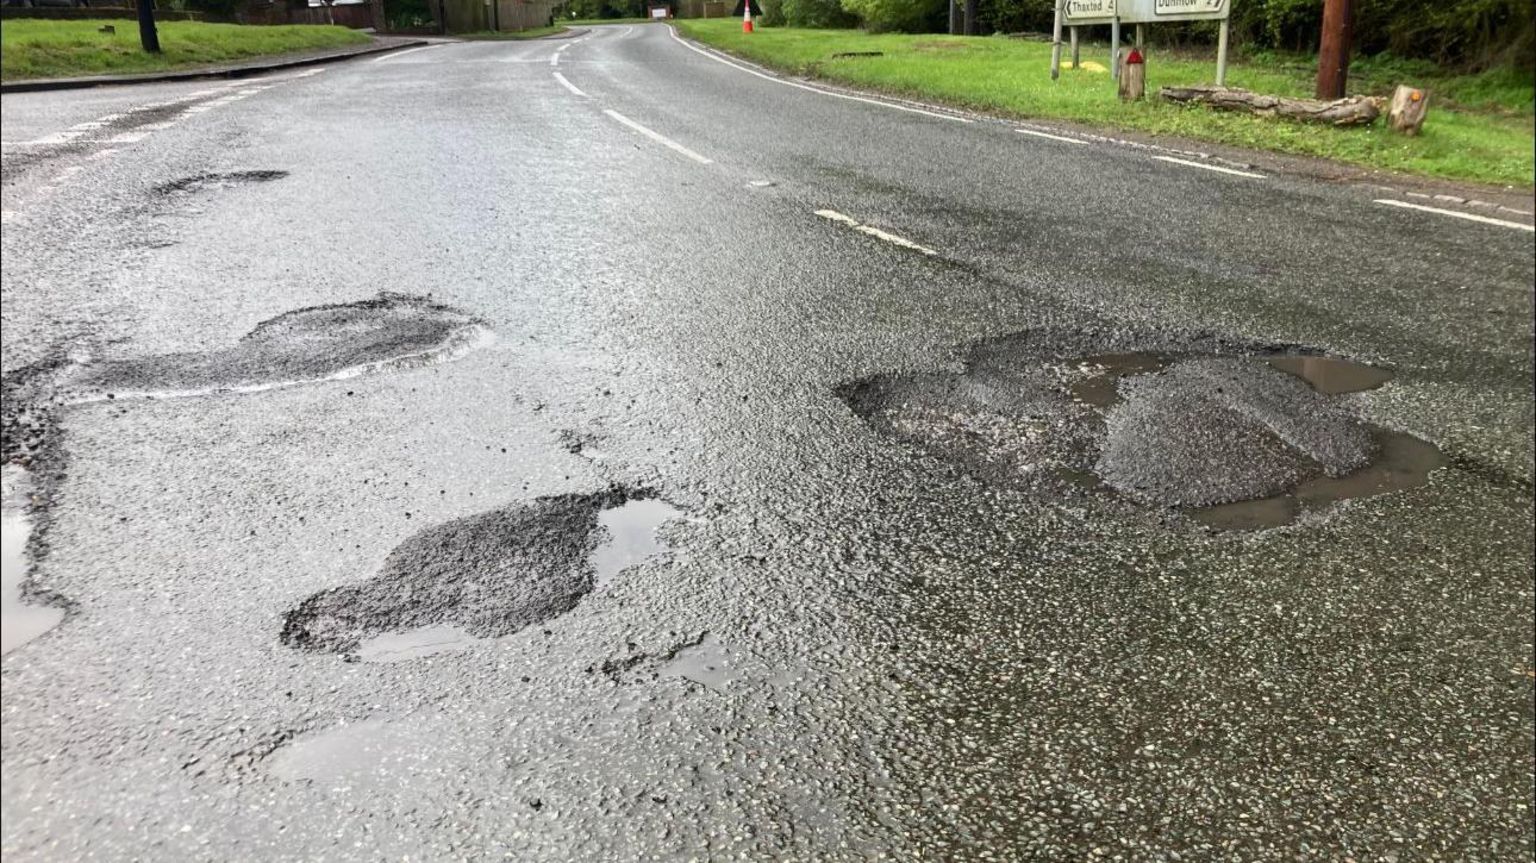 About five potholes on a road. The potholes are on both sides of the road and the image also shows grass and the poles of a sign but not the entire sign